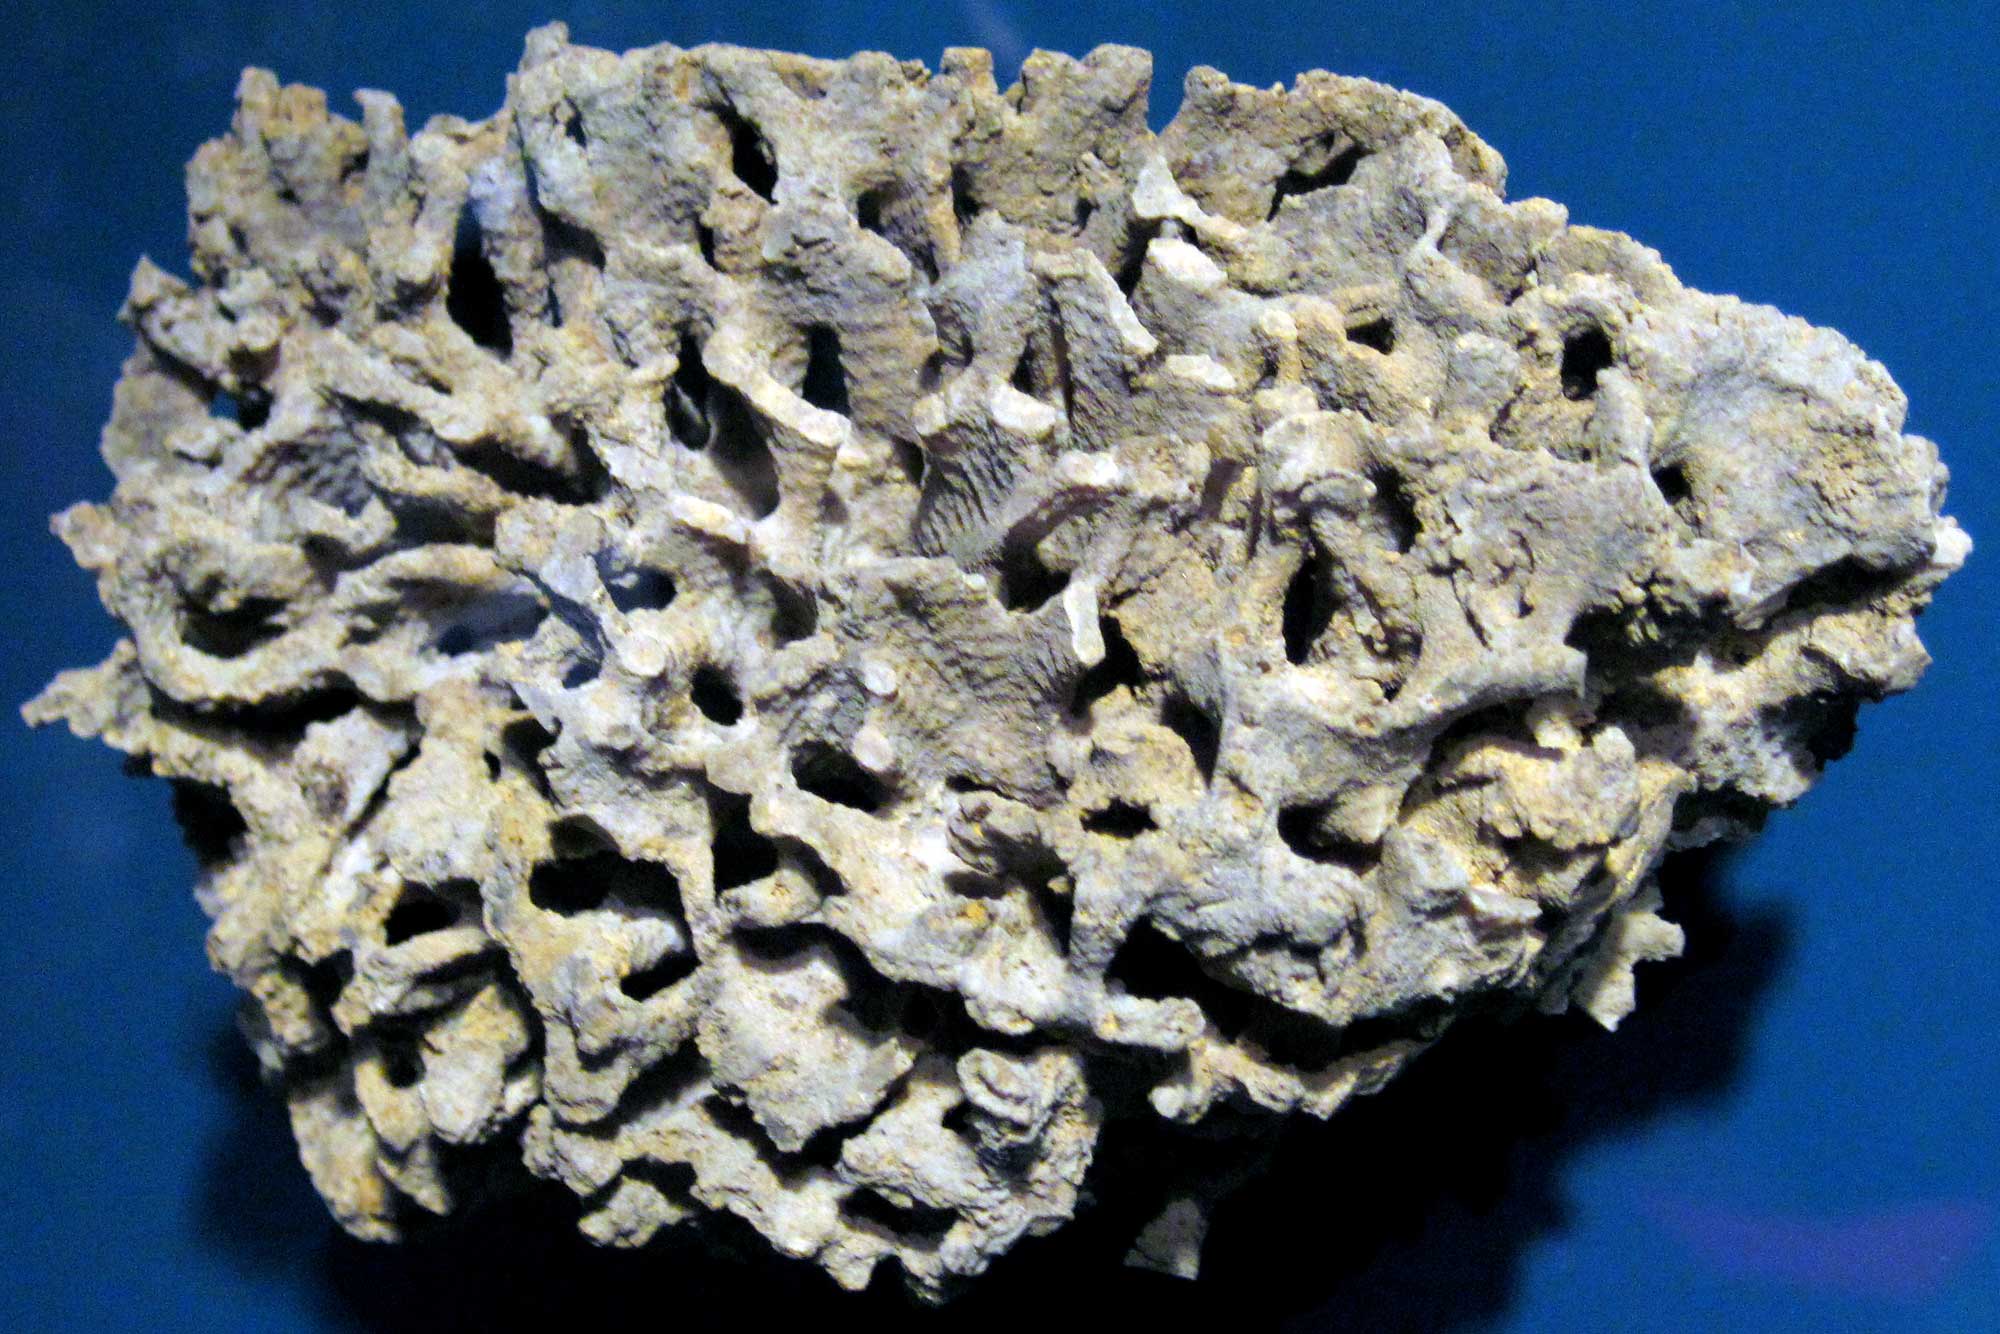 Photograph of a branching bryozoan from the Silurian of Illinois. The photo shows a heavily branched, gray structure that his completely weathered out of the rock matrix. The surface of the bryozoan is bumpy.